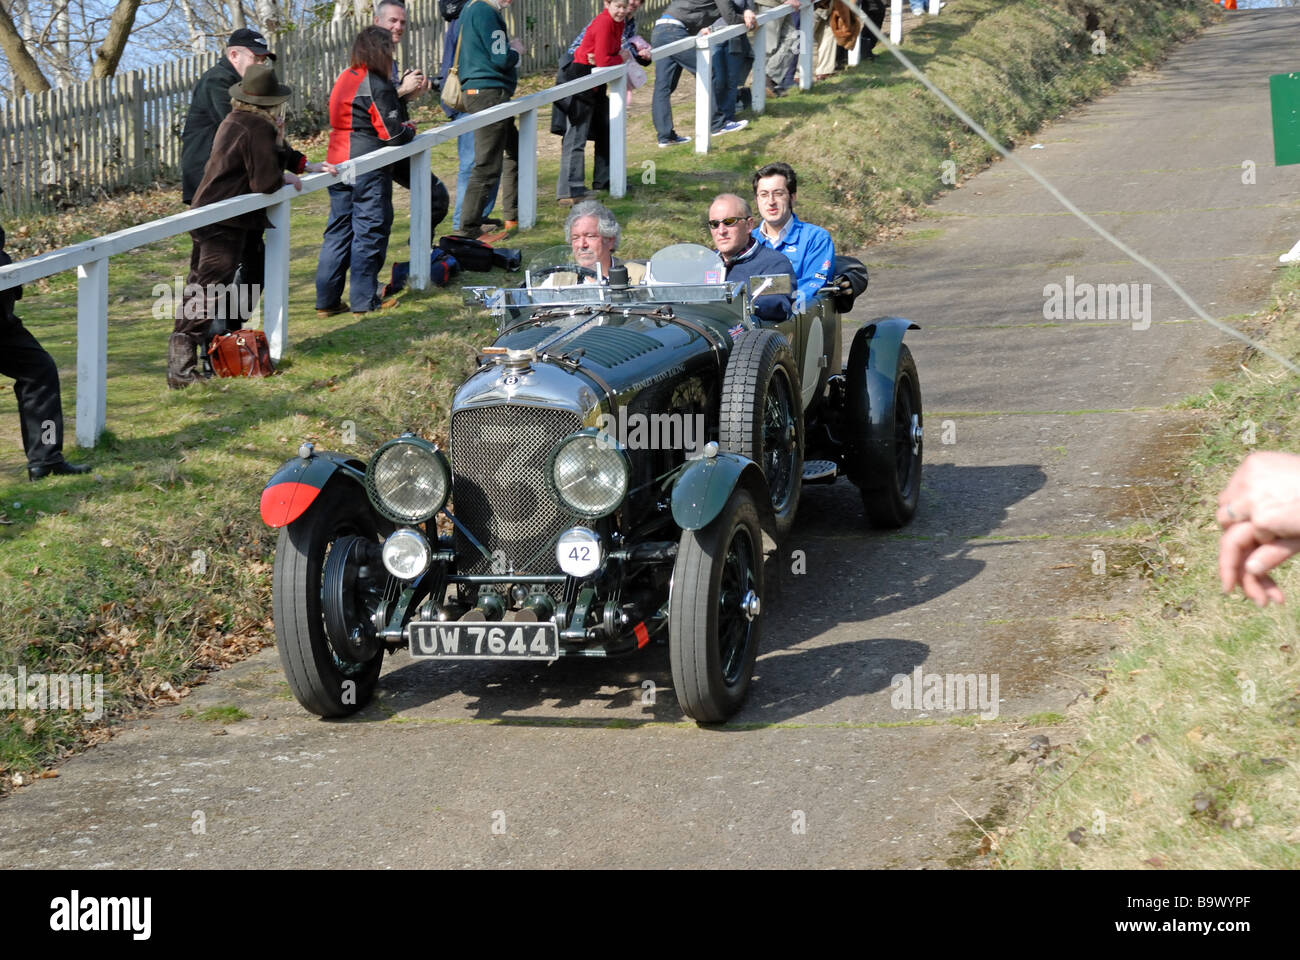 UW 7644 a 1929 Bentley 4 5 litre Le Mans Stanley Mann descending at speed on the Brooklands Museum Test Hill Challenge Stock Photo